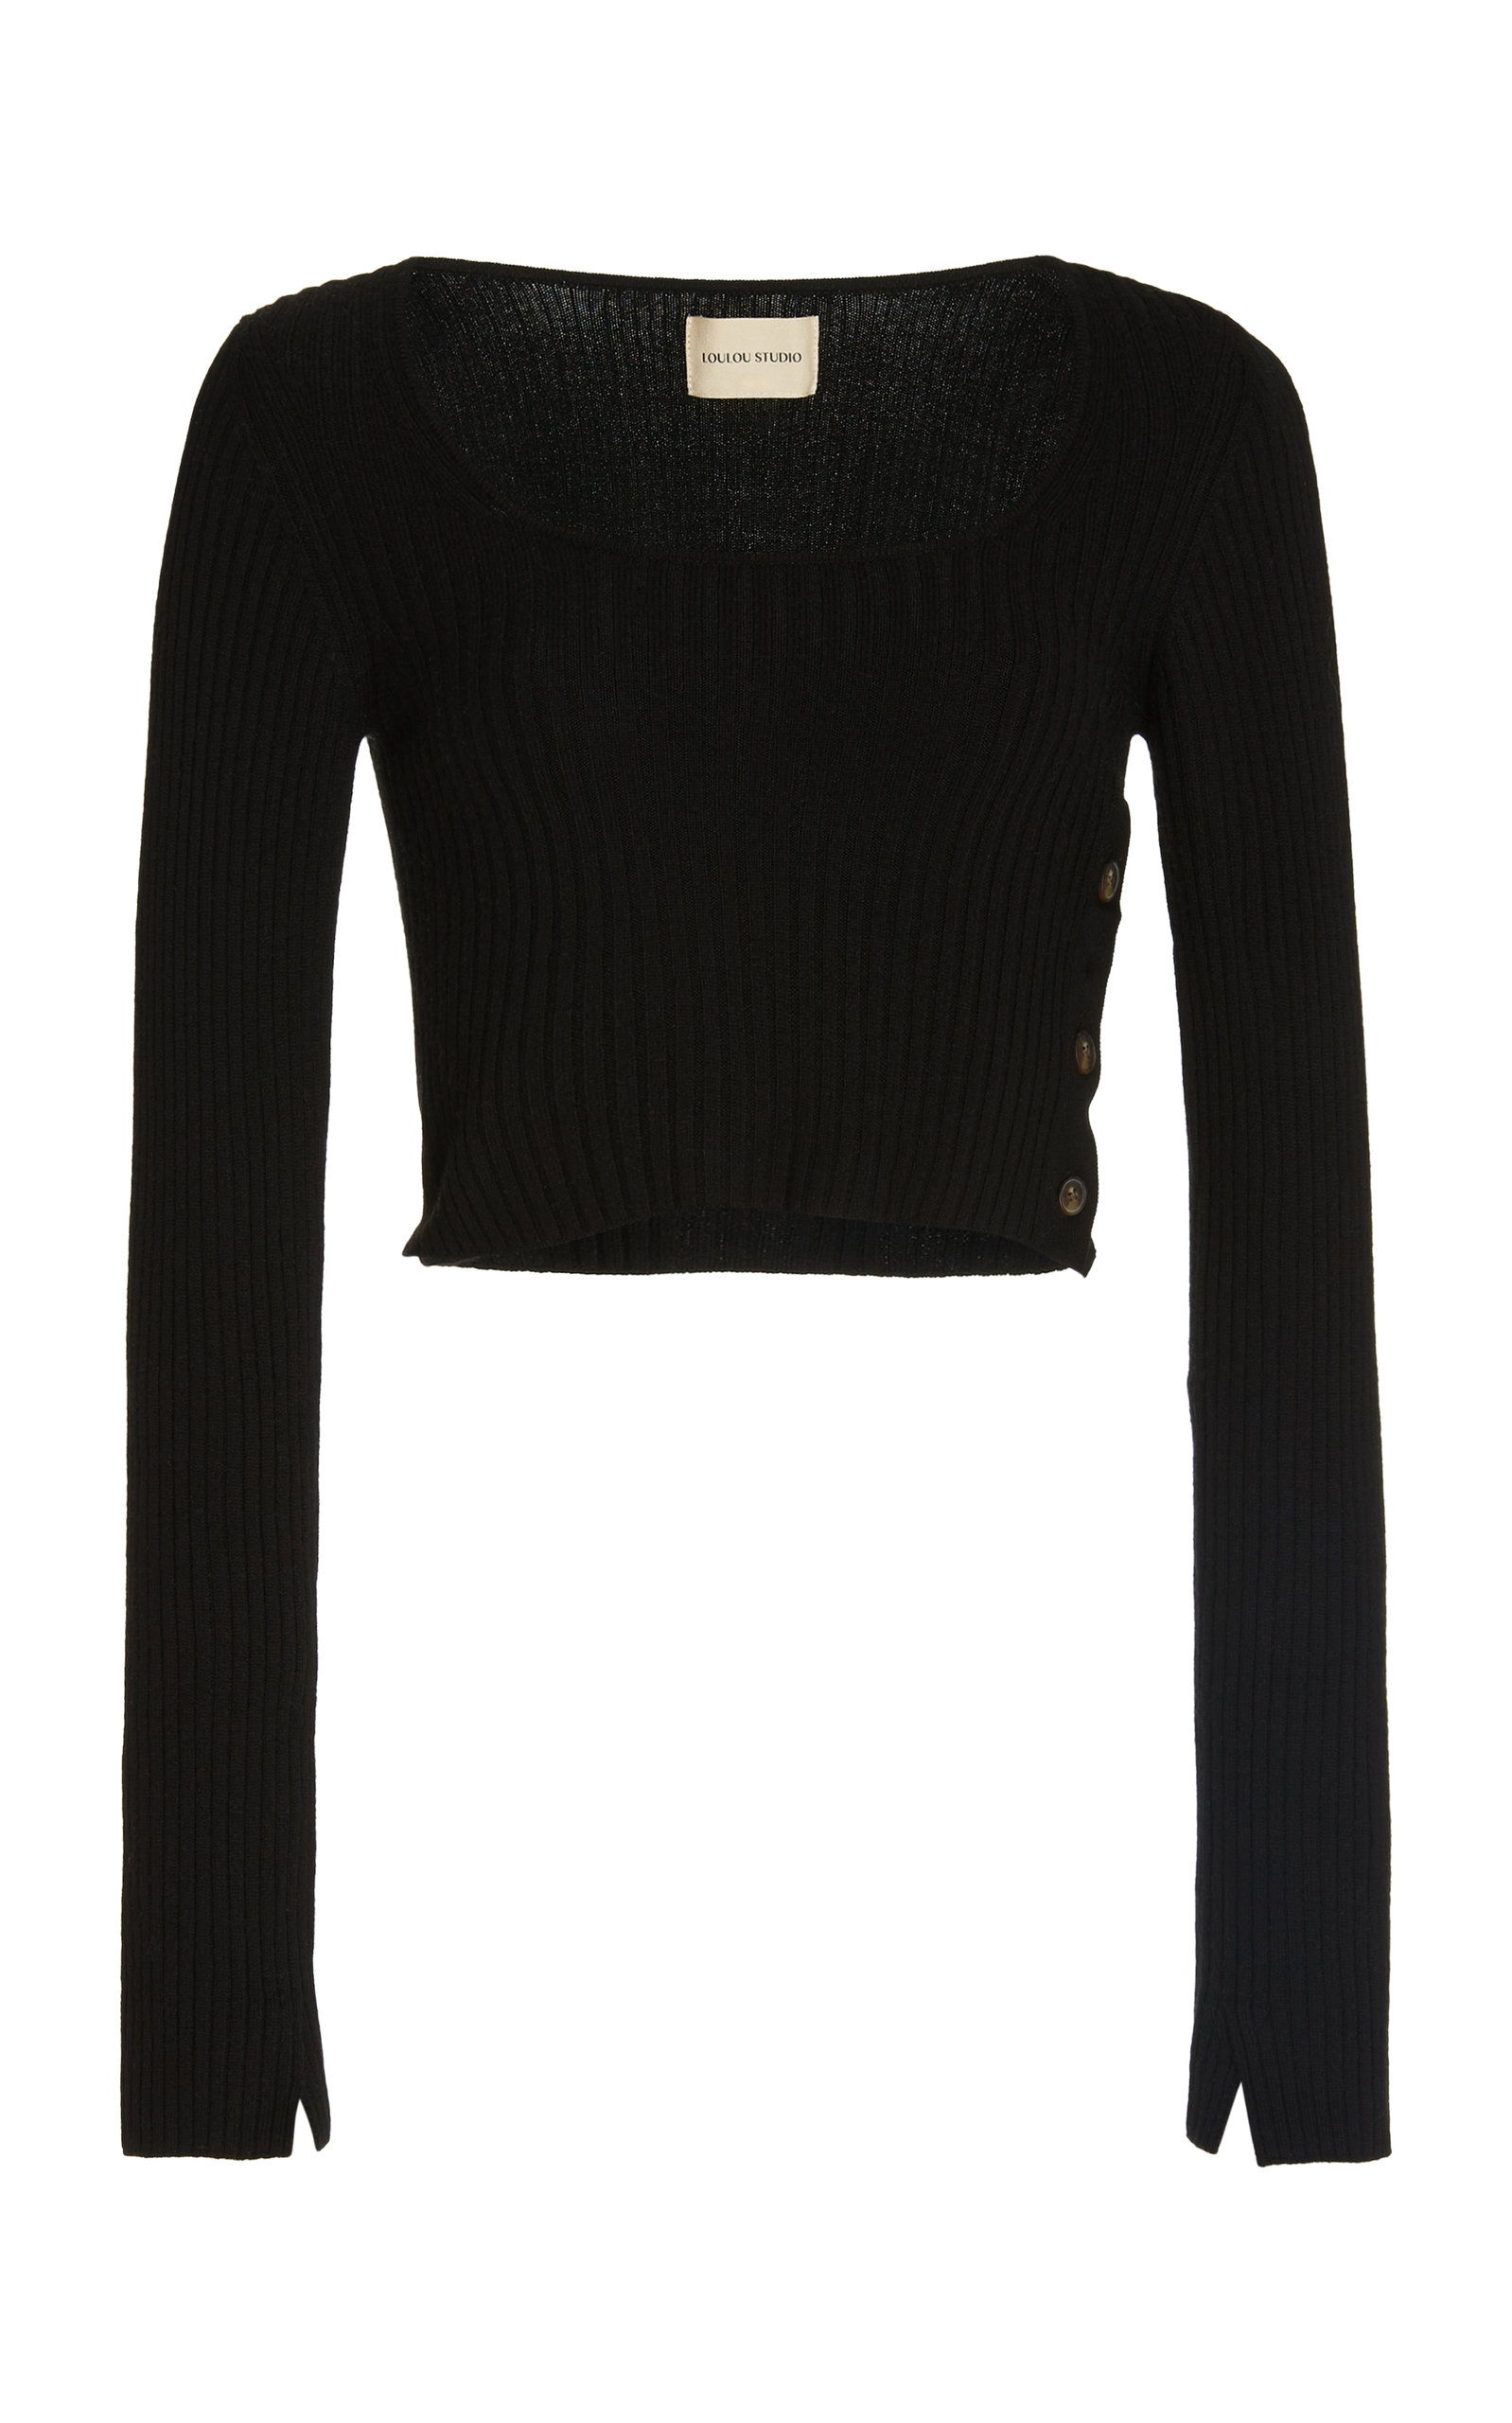 Loulou Studio Women's Wool-Cashmere Cropped Top